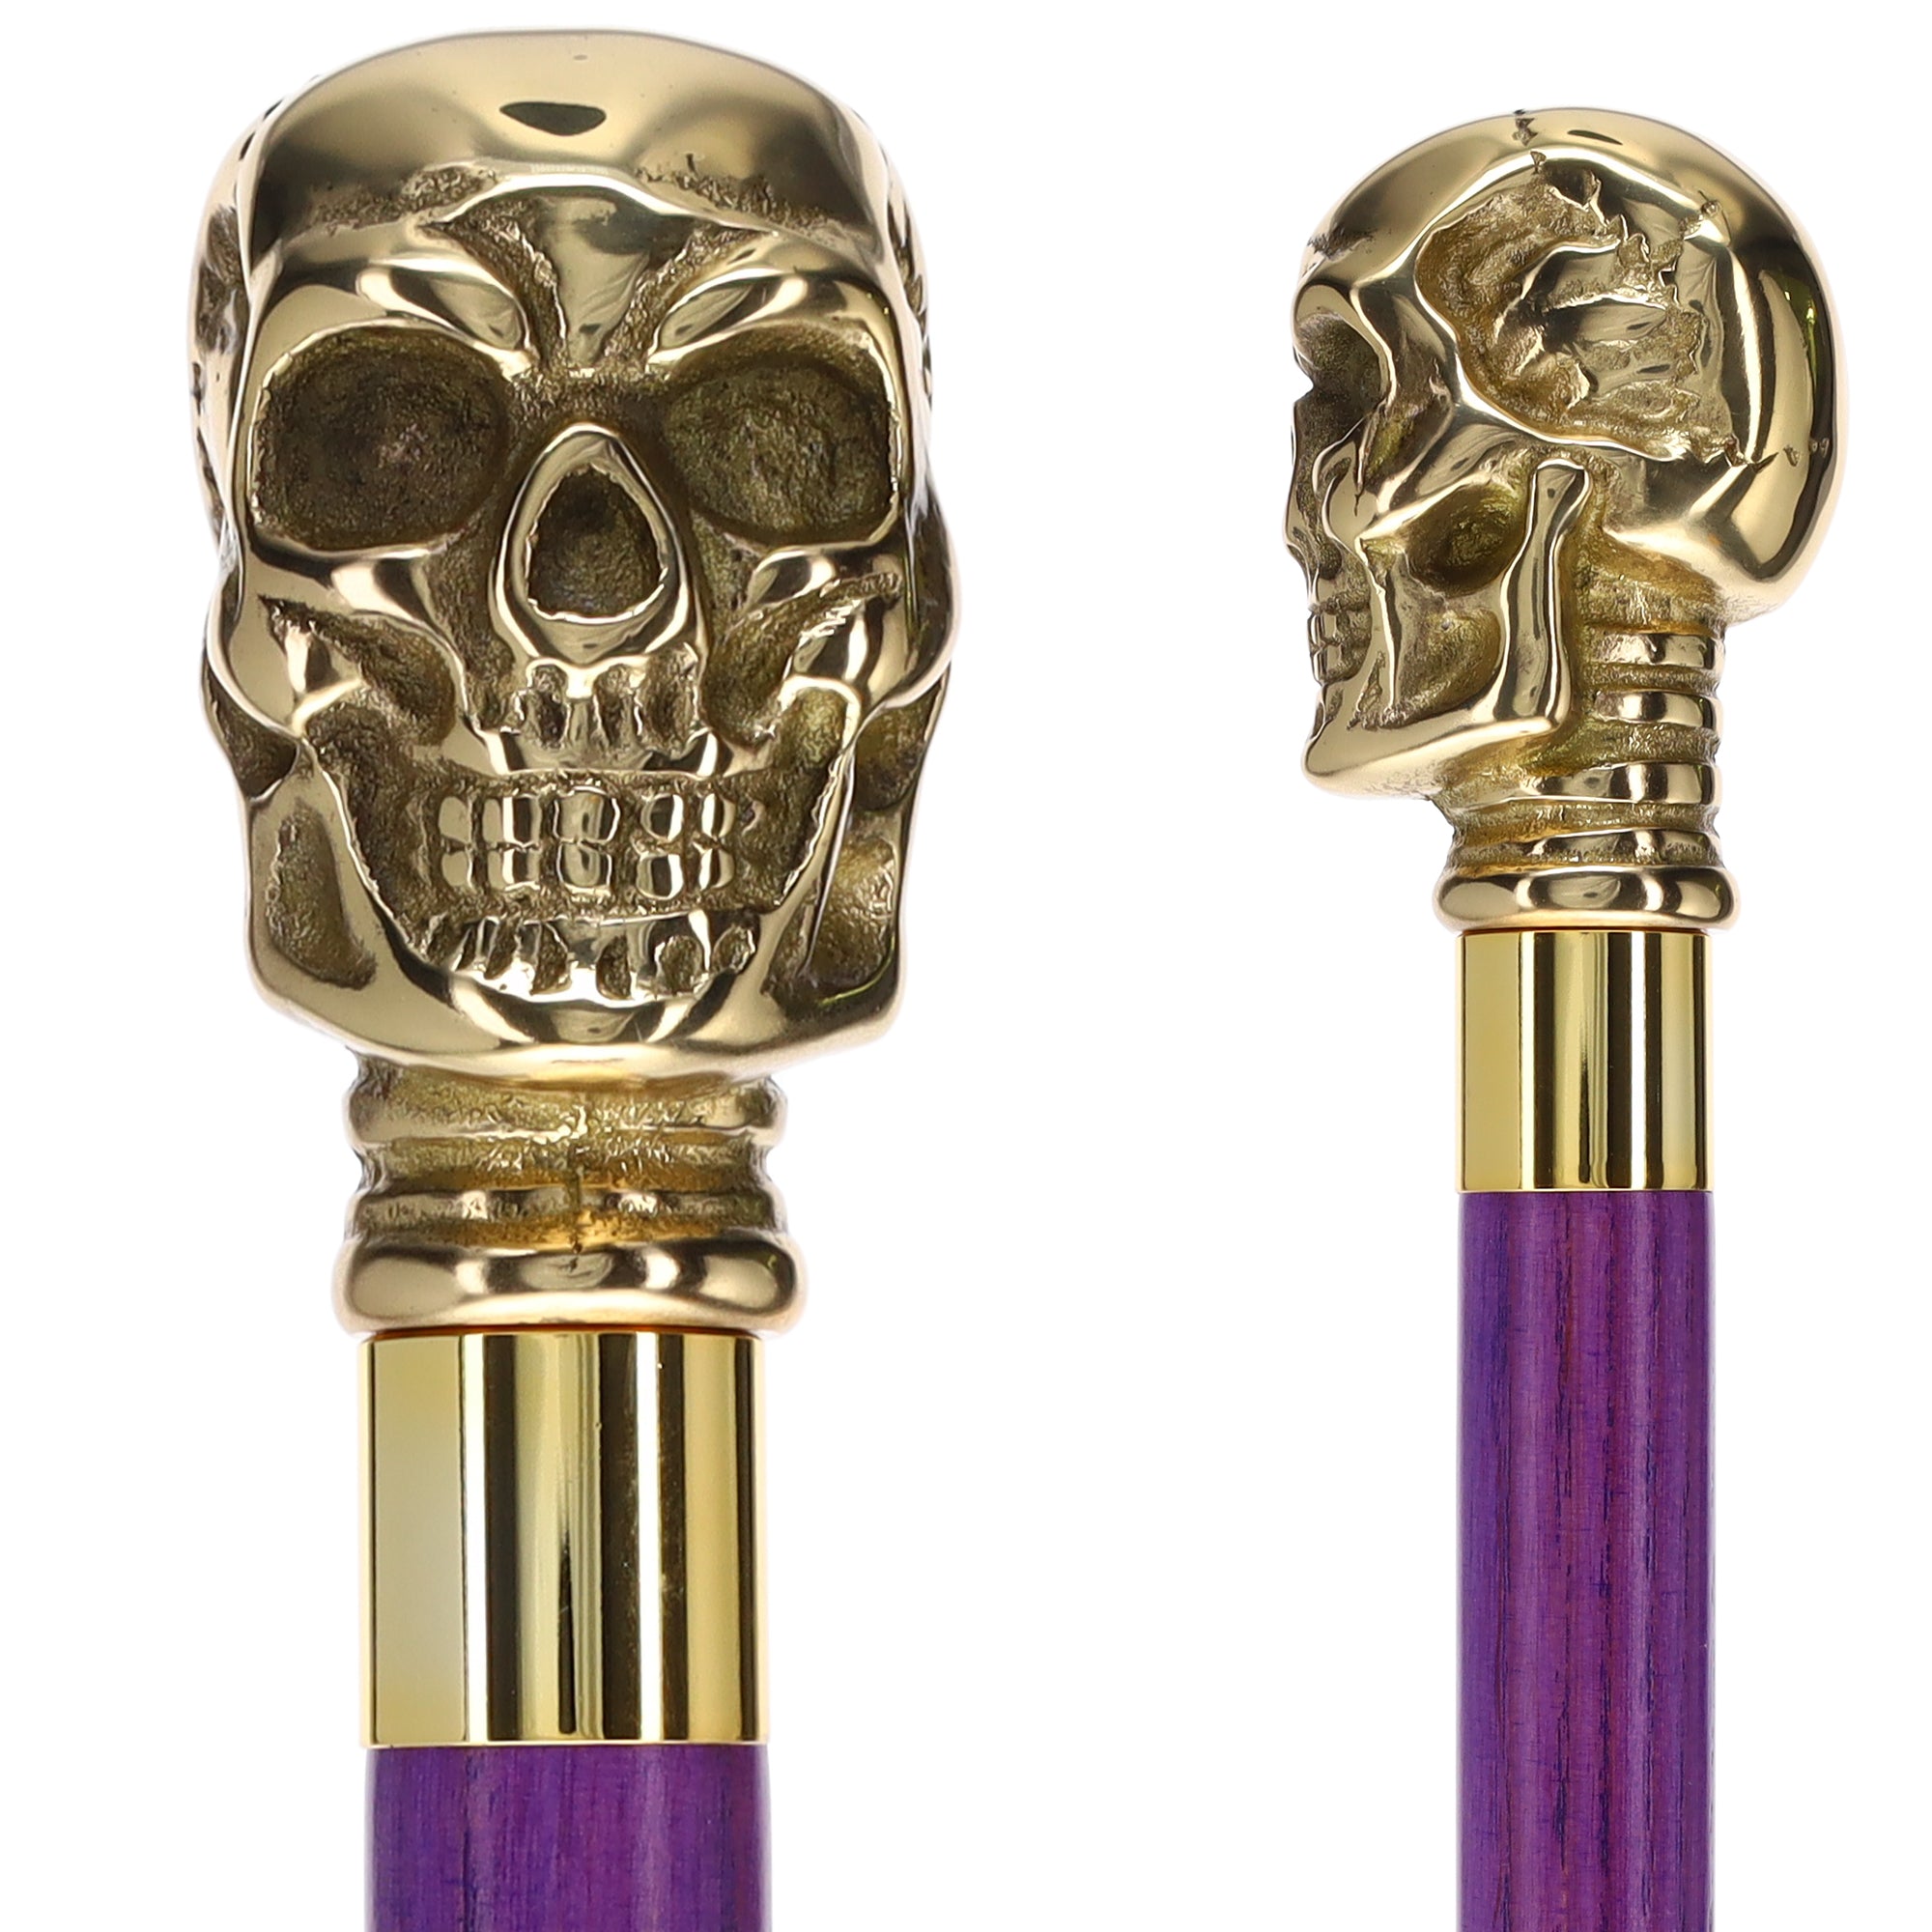 Cane Handle Only Brass Tip - Screw-on Decorative Topper for Walking Stick,  Replacement Handle for Canes and Sticks - Skull Head Design - Dragon Style